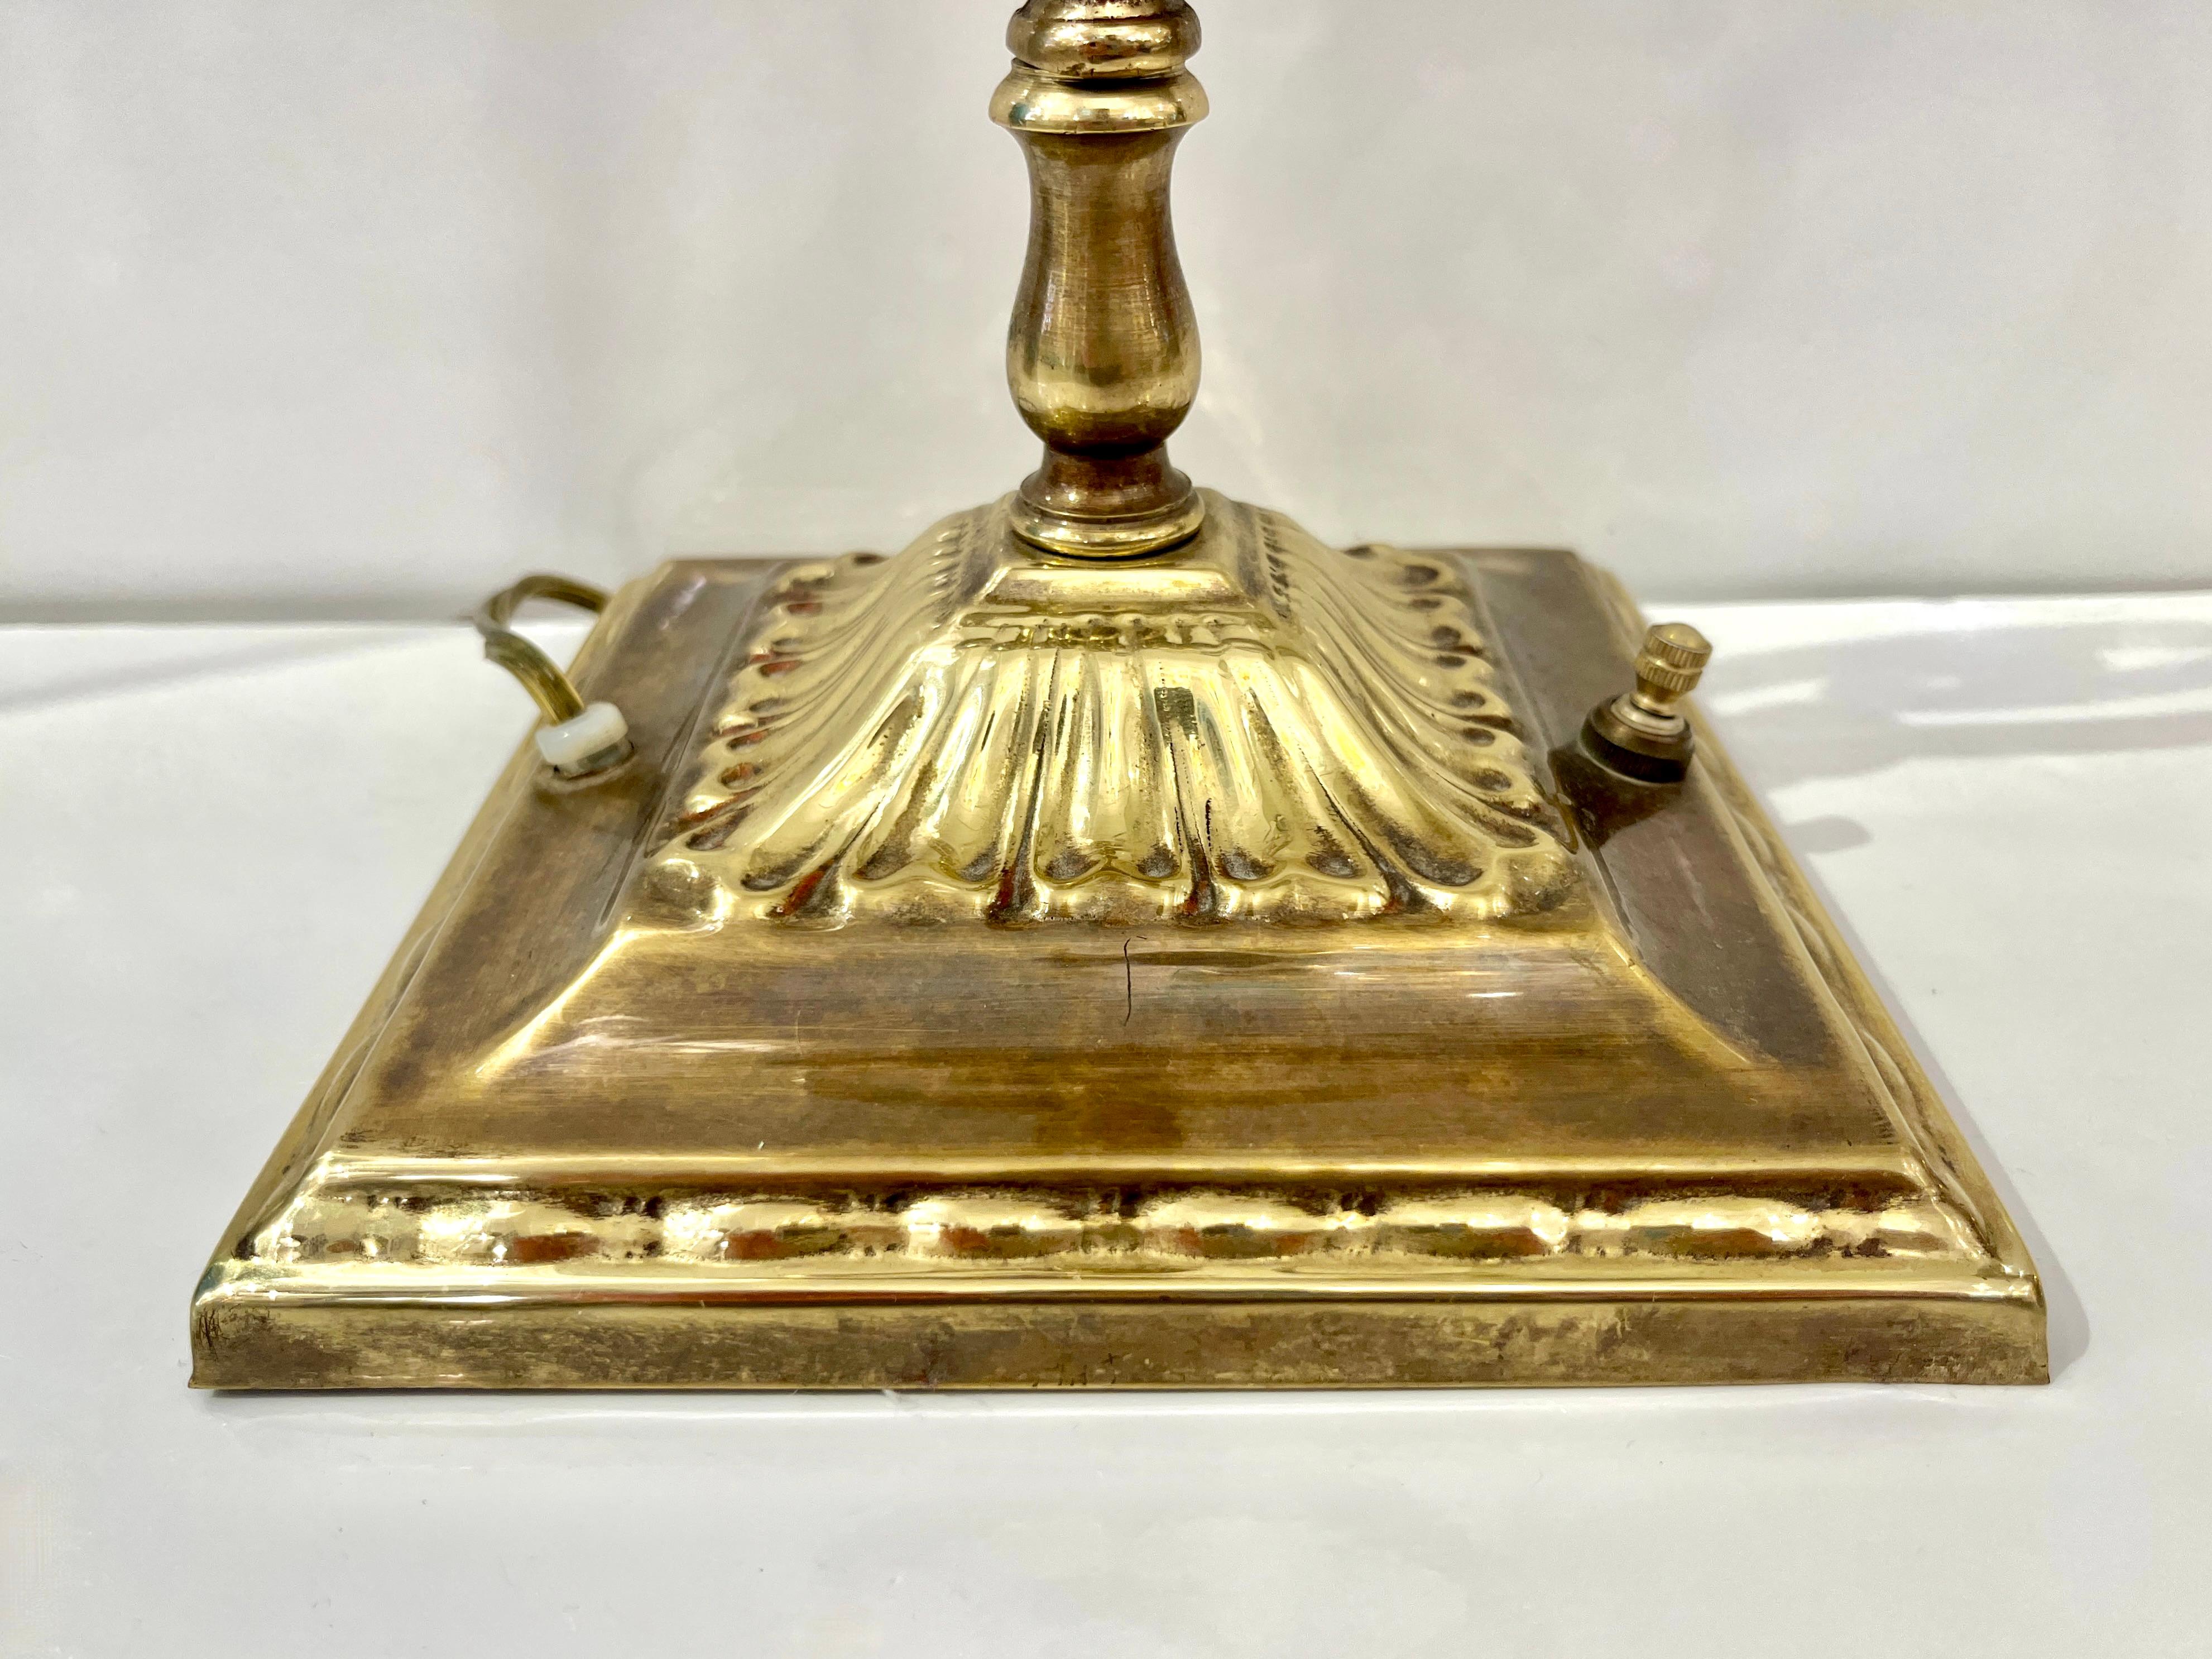 1950s American Art Deco Style Brass Table/Desk Lamp with Satin White Glass Shade For Sale 4